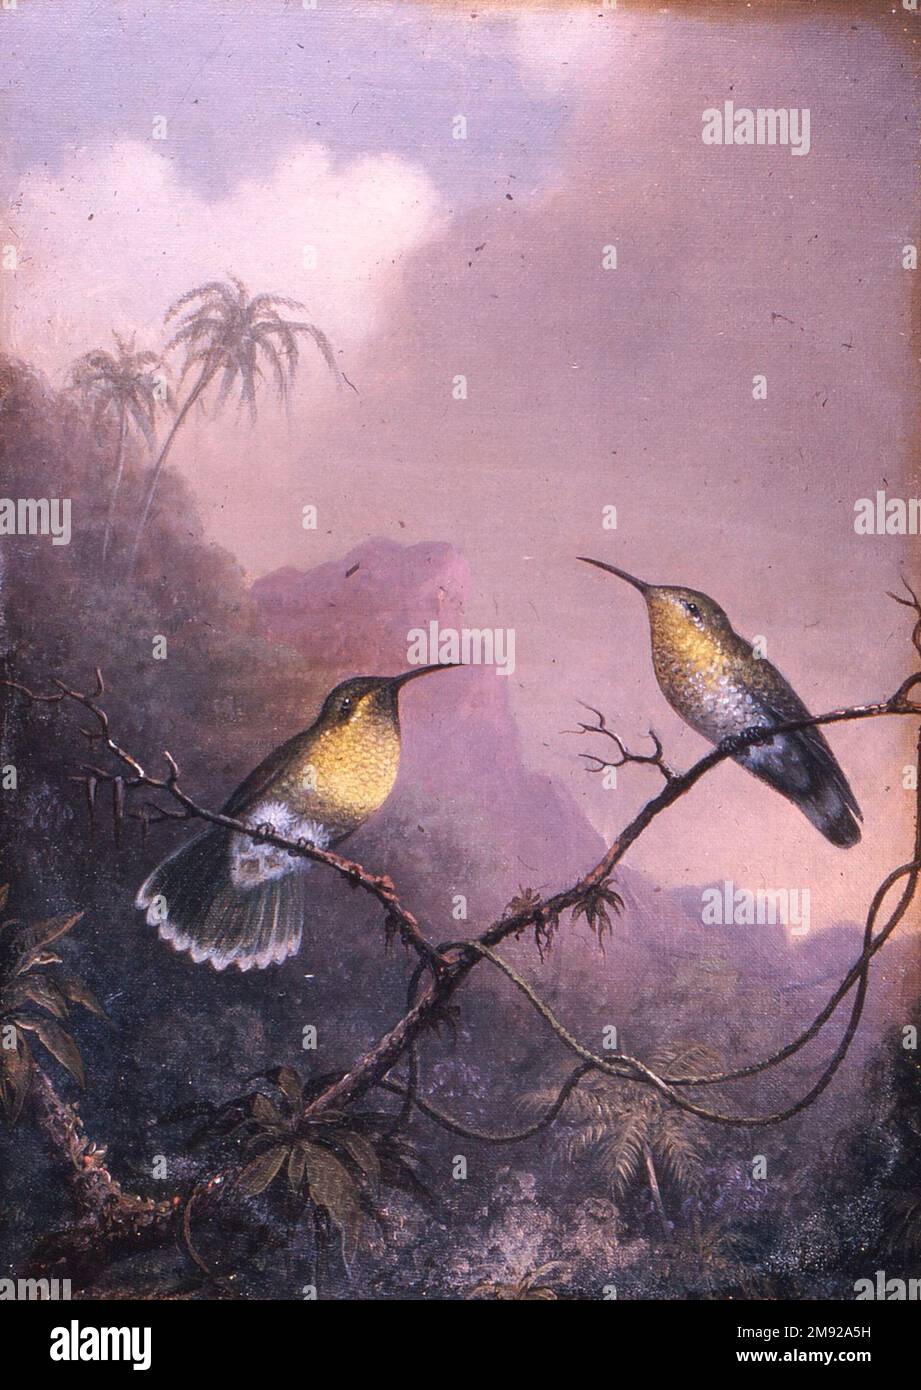 Two Humming Birds: 'Copper-tailed Amazili' Martin Johnson Heade (American, 1819-1904). Two Humming Birds: 'Copper-tailed Amazili,' ca.1865-1875. Oil on canvas, 11 9/16 x 8 7/16 in. (29.3 x 21.5 cm).  Martin Johnson Heade was inspired not only by the North American landscape, but by South America as well. In 1863 he traveled to Brazil to paint images of “exotic” species of native hummingbirds. He based the works on both direct observation and his collection of hummingbird skins, though he took liberties with the description of the birds’ habitats. American Art ca.1865-1875 Stock Photo